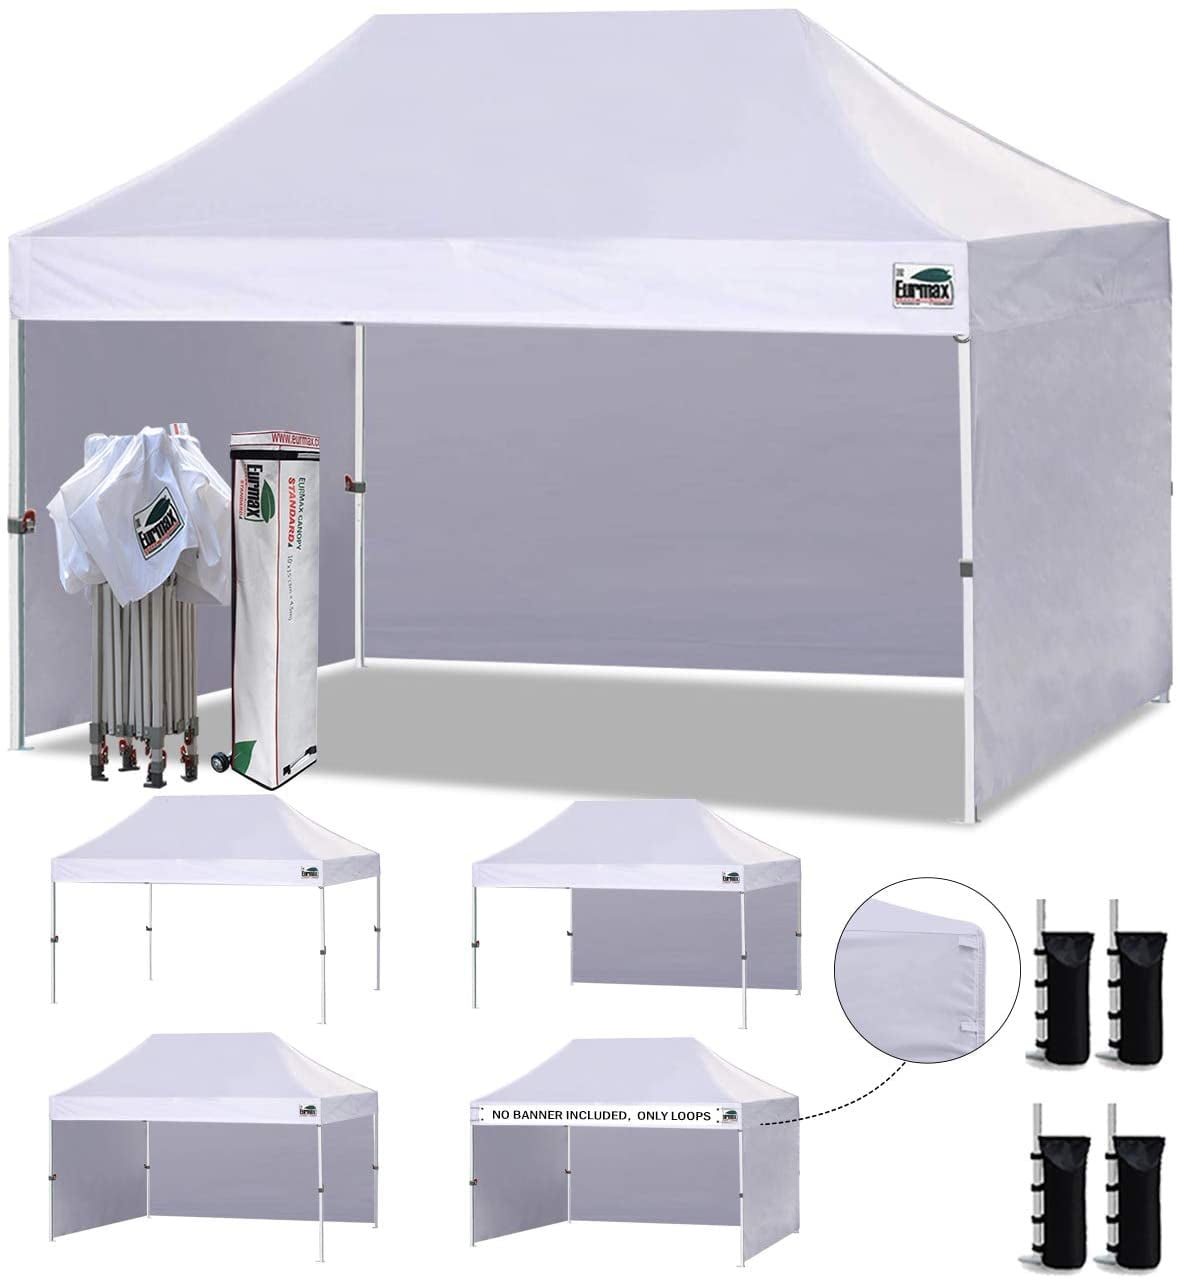 Bonus 4 SandBags Eurmax 10x10 Ez Pop-up Canopy Tent Commercial Instant Canopies with 4 Removable Zipper End Side Walls and Roller Bag Black